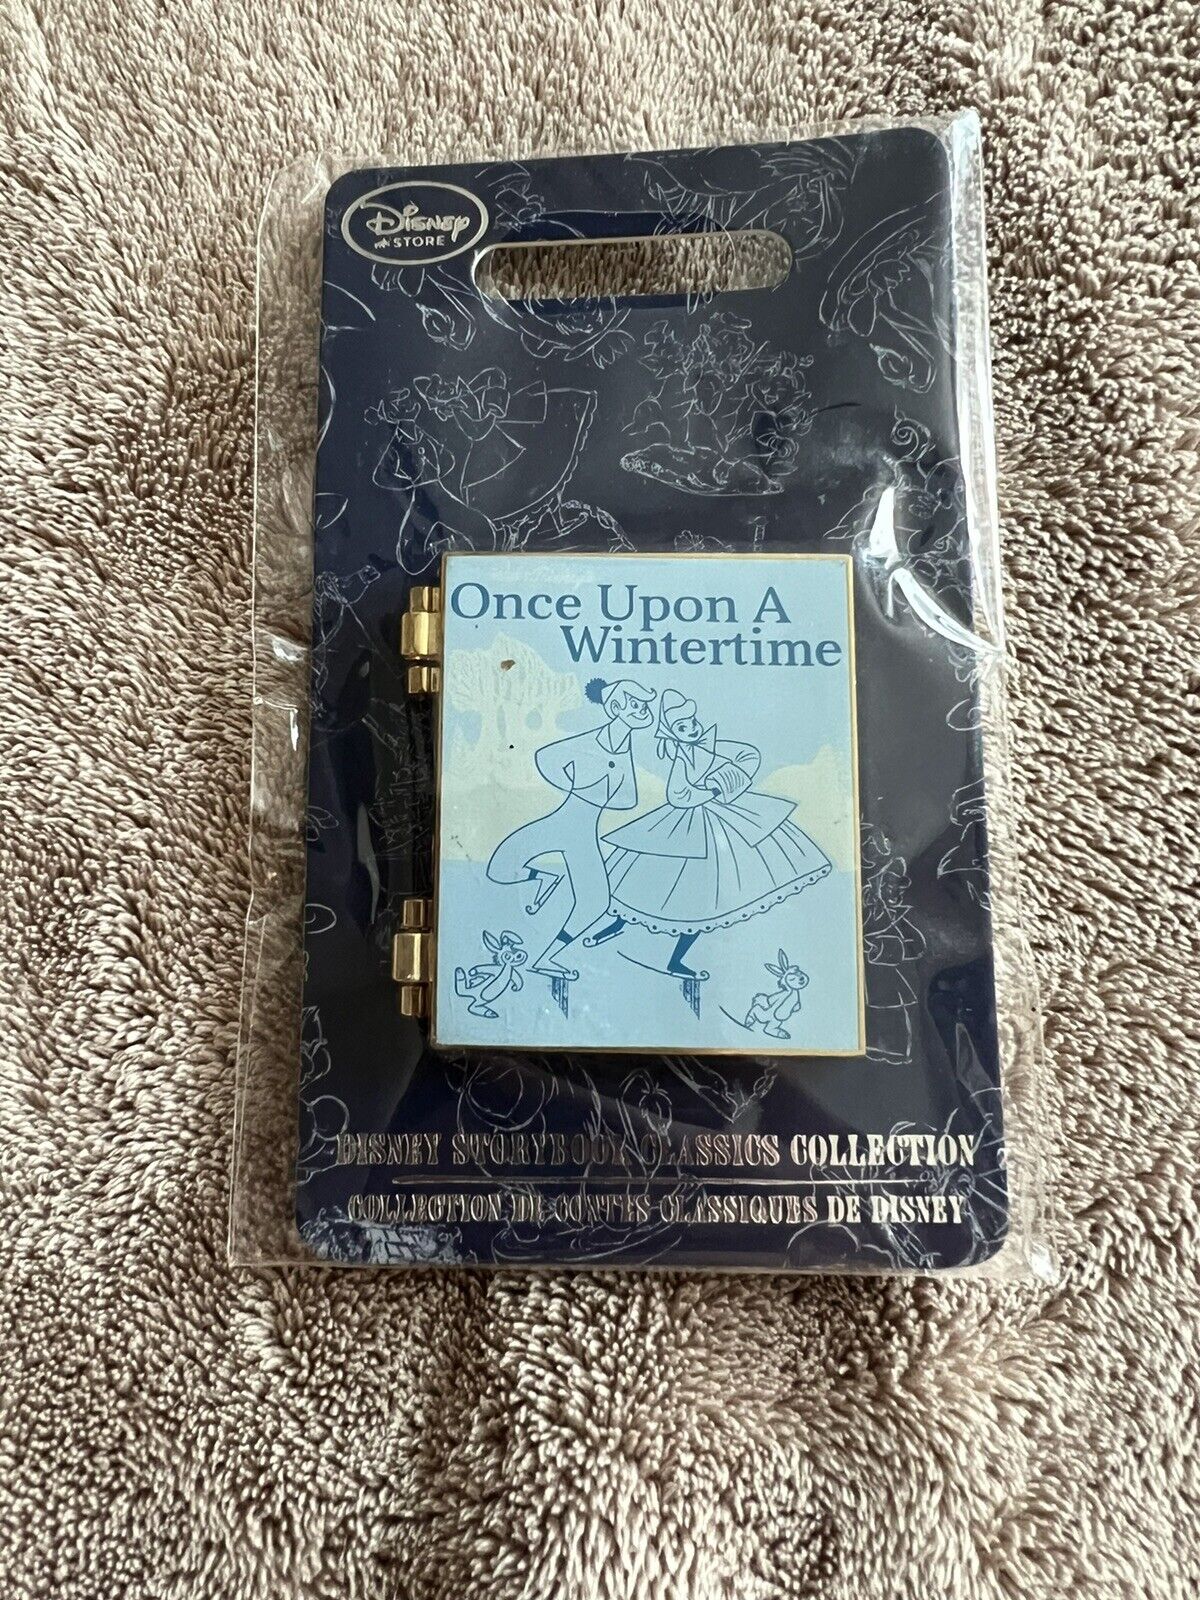 NEW Disney Storybook Classics Collection Once Upon a Wintertime Pin LimitedOp